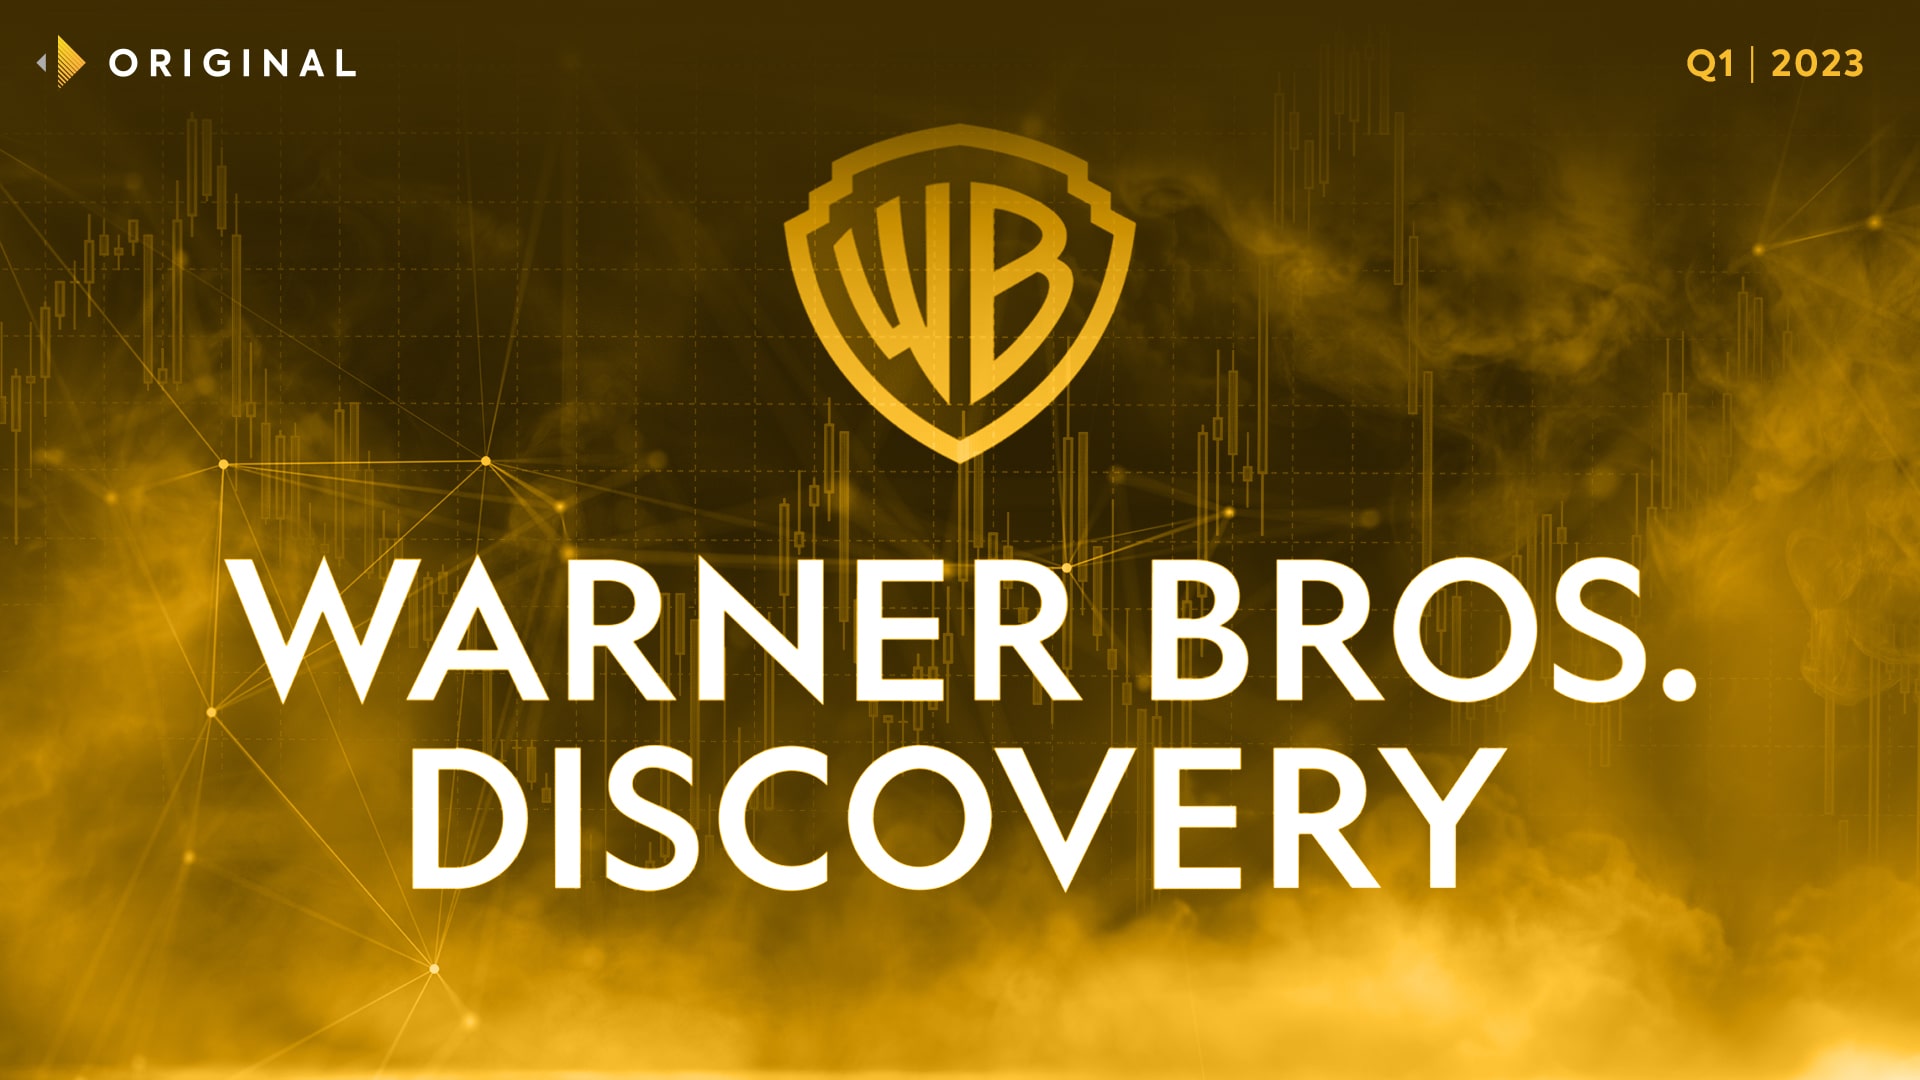 Various versions of potential Warner Bros. Discovery logo